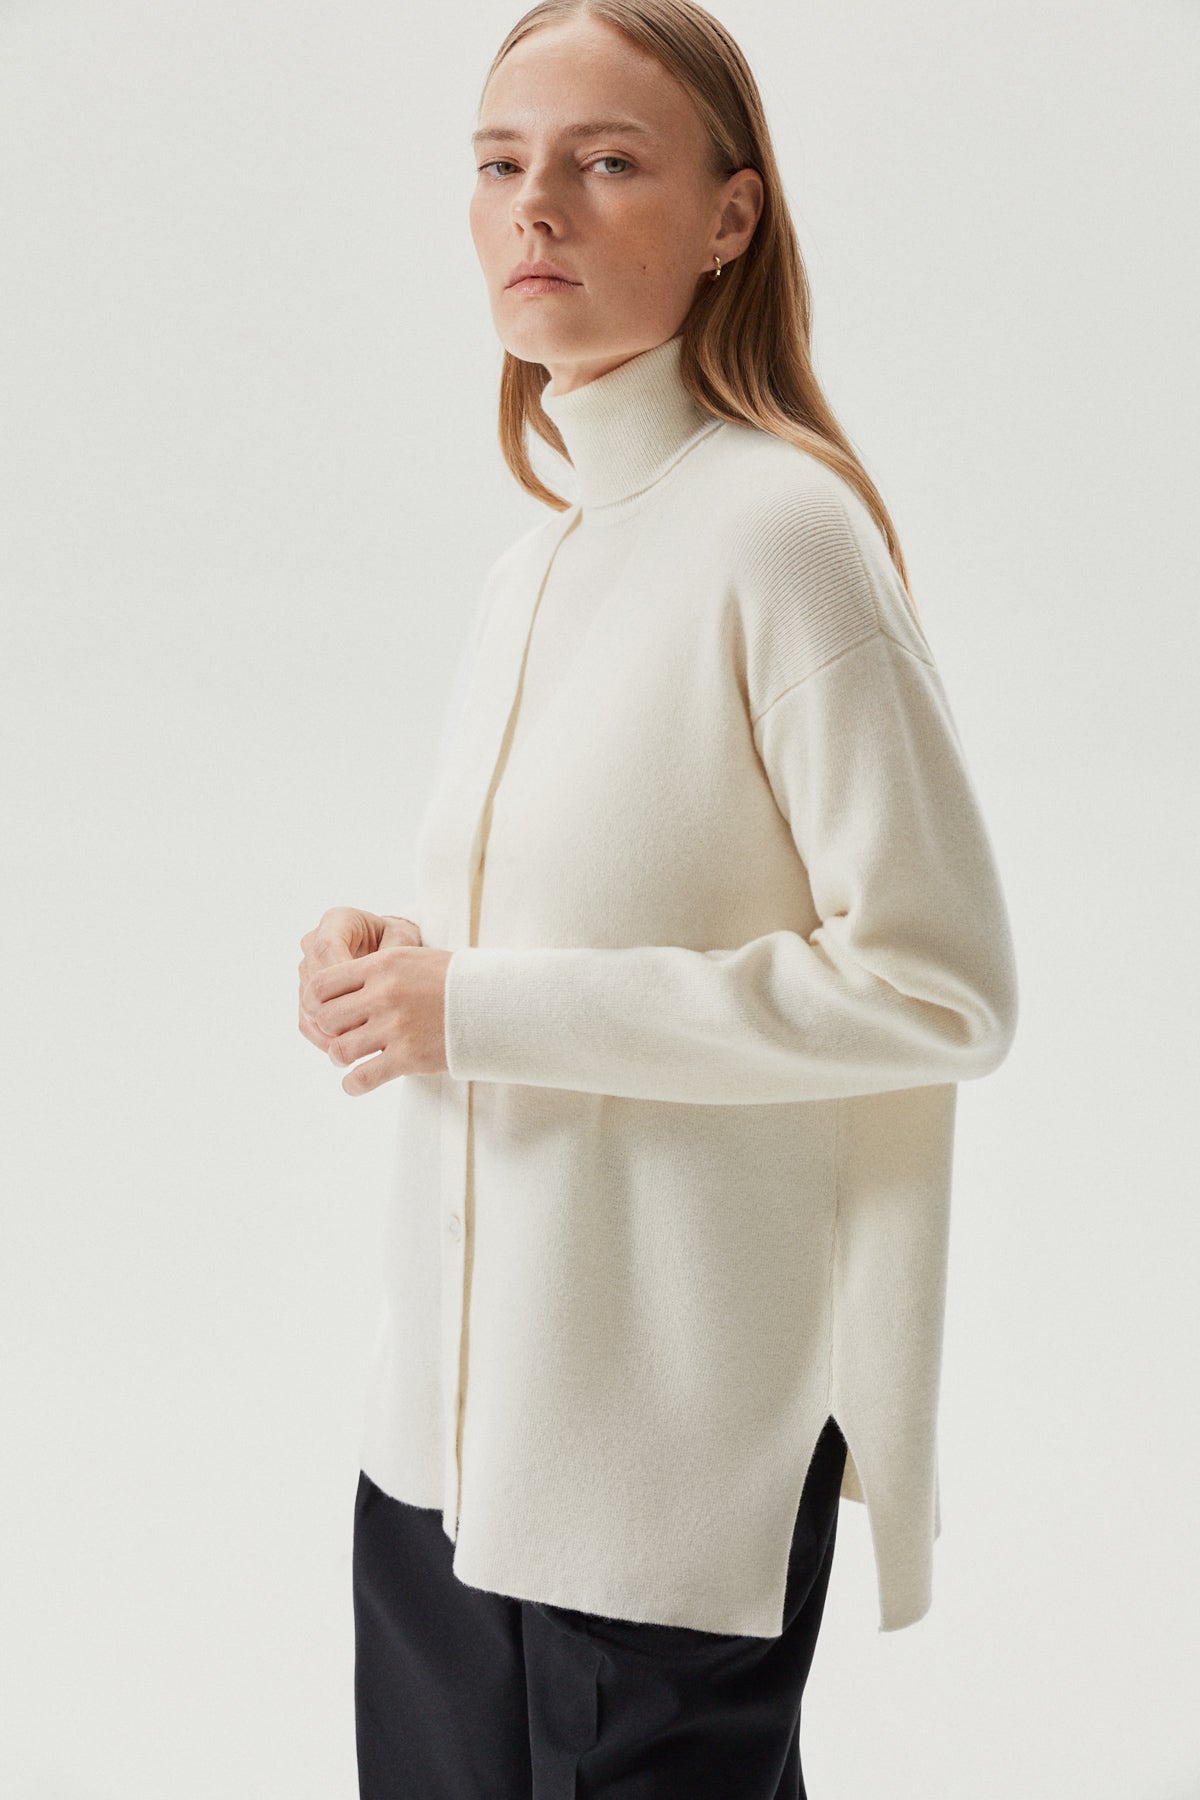 Snow White | The Superior Cashmere Chunky Cardigan